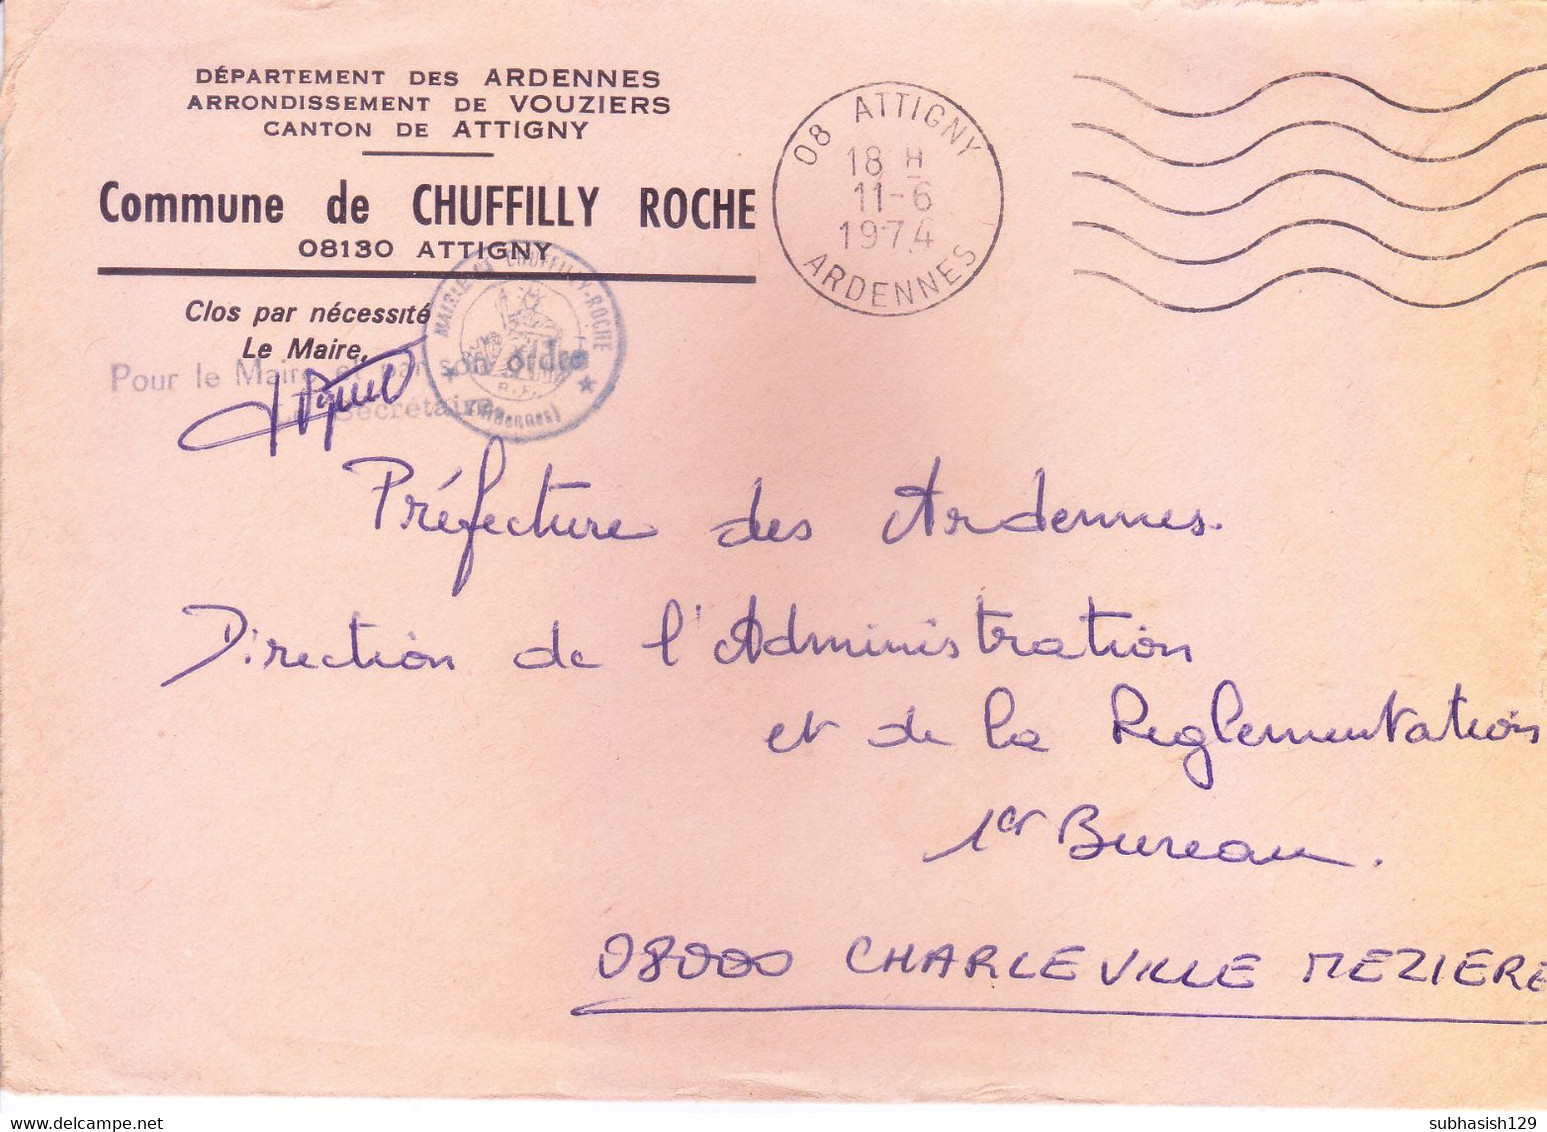 FRANCE : OFFICIAL ENVELOPE : MAYOR OFFICE : COMMUNE DE CHUFFILLY ROCHE : USED IN 1974 - Lettres & Documents